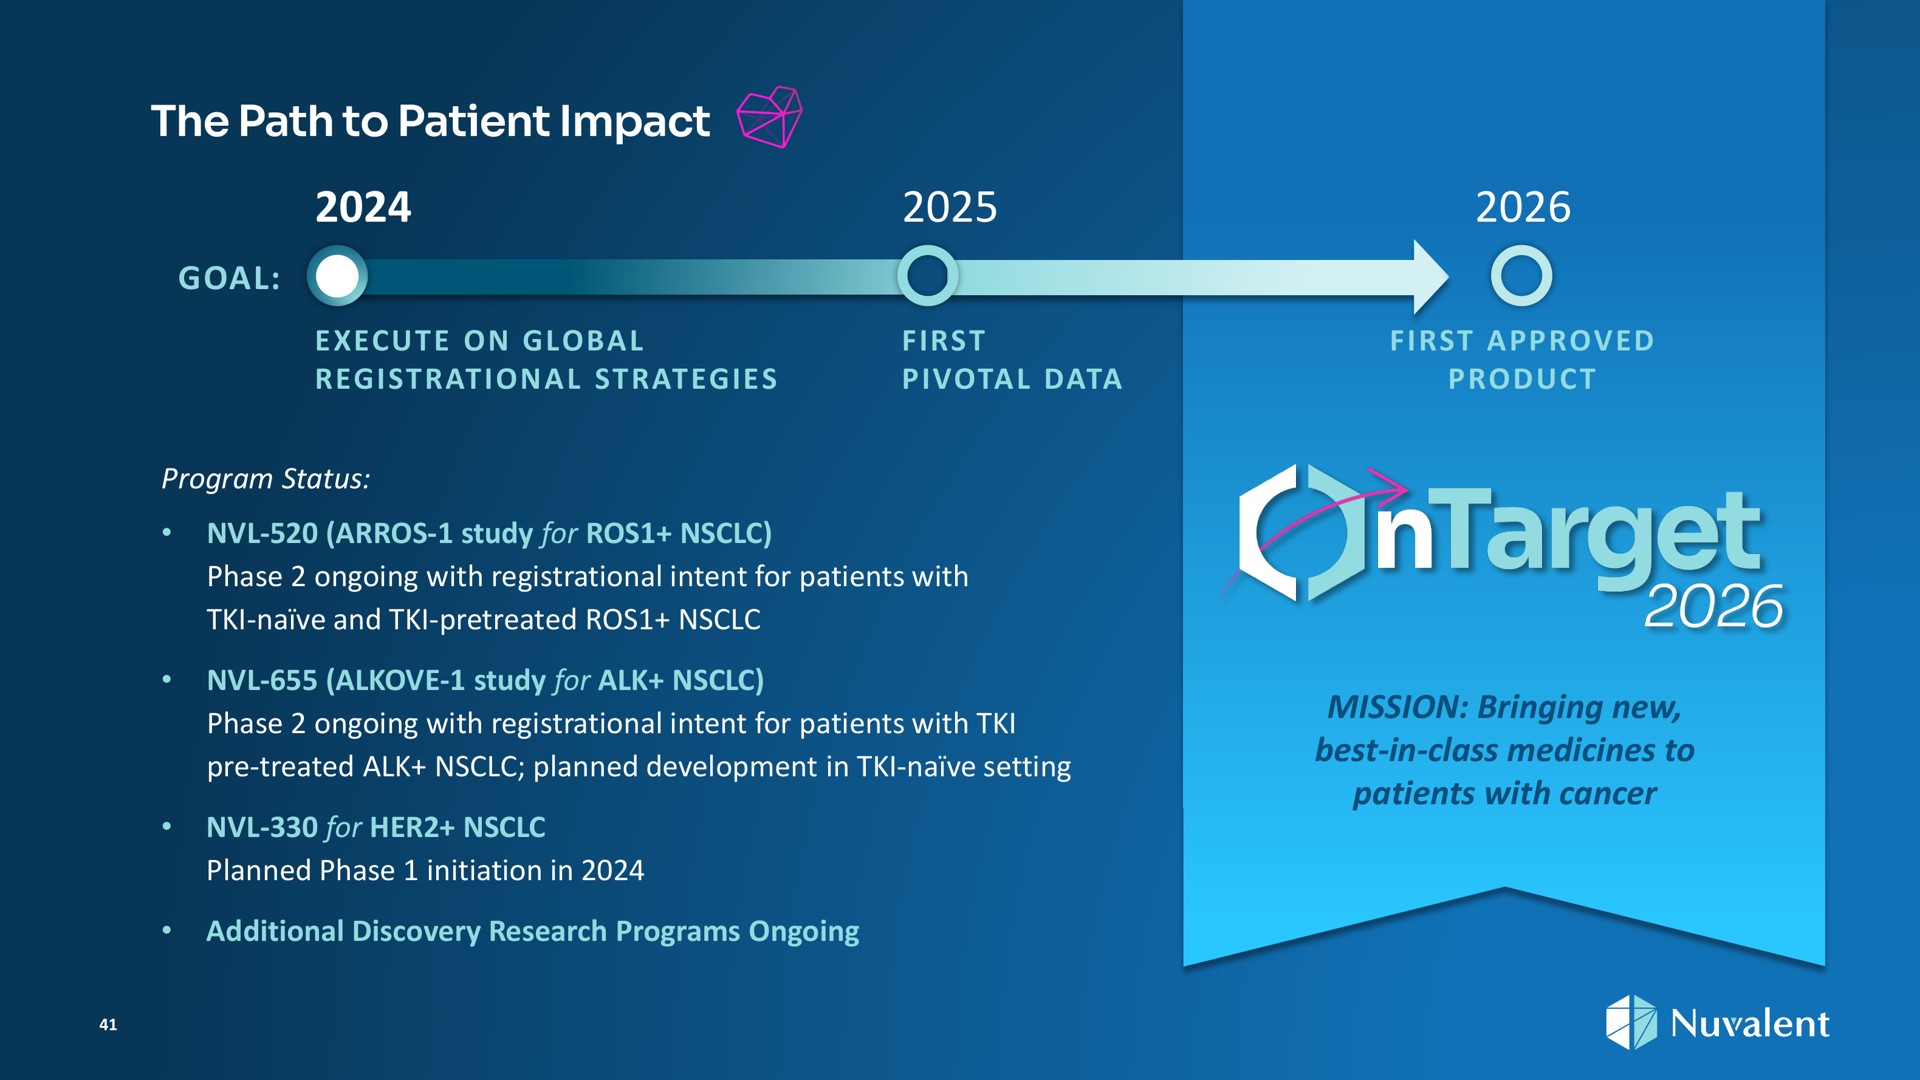 the path to patient impact program status first approved a toe pivotal data naive and study for phase ongoing with registrational intent for patients with execute on global registrational strategies additional discovery research programs ongoing product mission bringing new best in class medicines to patients with cancer treated alk planned development in naive setting phase ongoing with registrational intent for patients with study for alk planned phase initiation in for her | Nuvalent